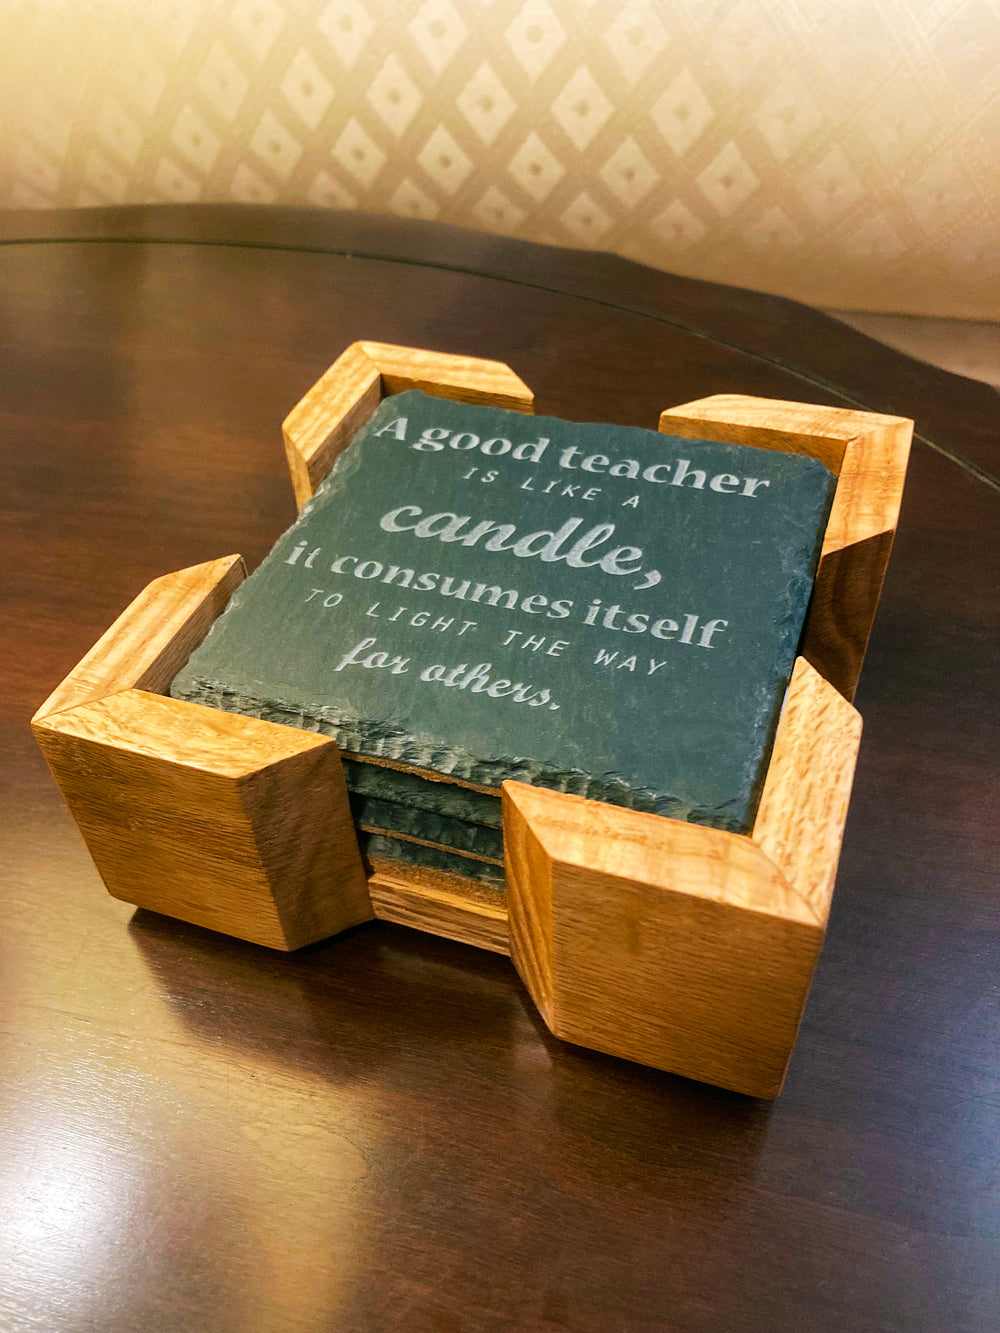 This handmade coaster holder is made from solid oak wood. Add this beautiful holder to keep your coasters neat and tidy. Felt feet to protect from scratching. Add this upgrade to your gift purchase. Holder only. Coasters sold separately. Outside Dimensions: 5-1/8"L x x5-1/8"W x 1-3/4"HInside Dimensions: 4-1/8"L x 4-1/8"W x 1-1/4"H